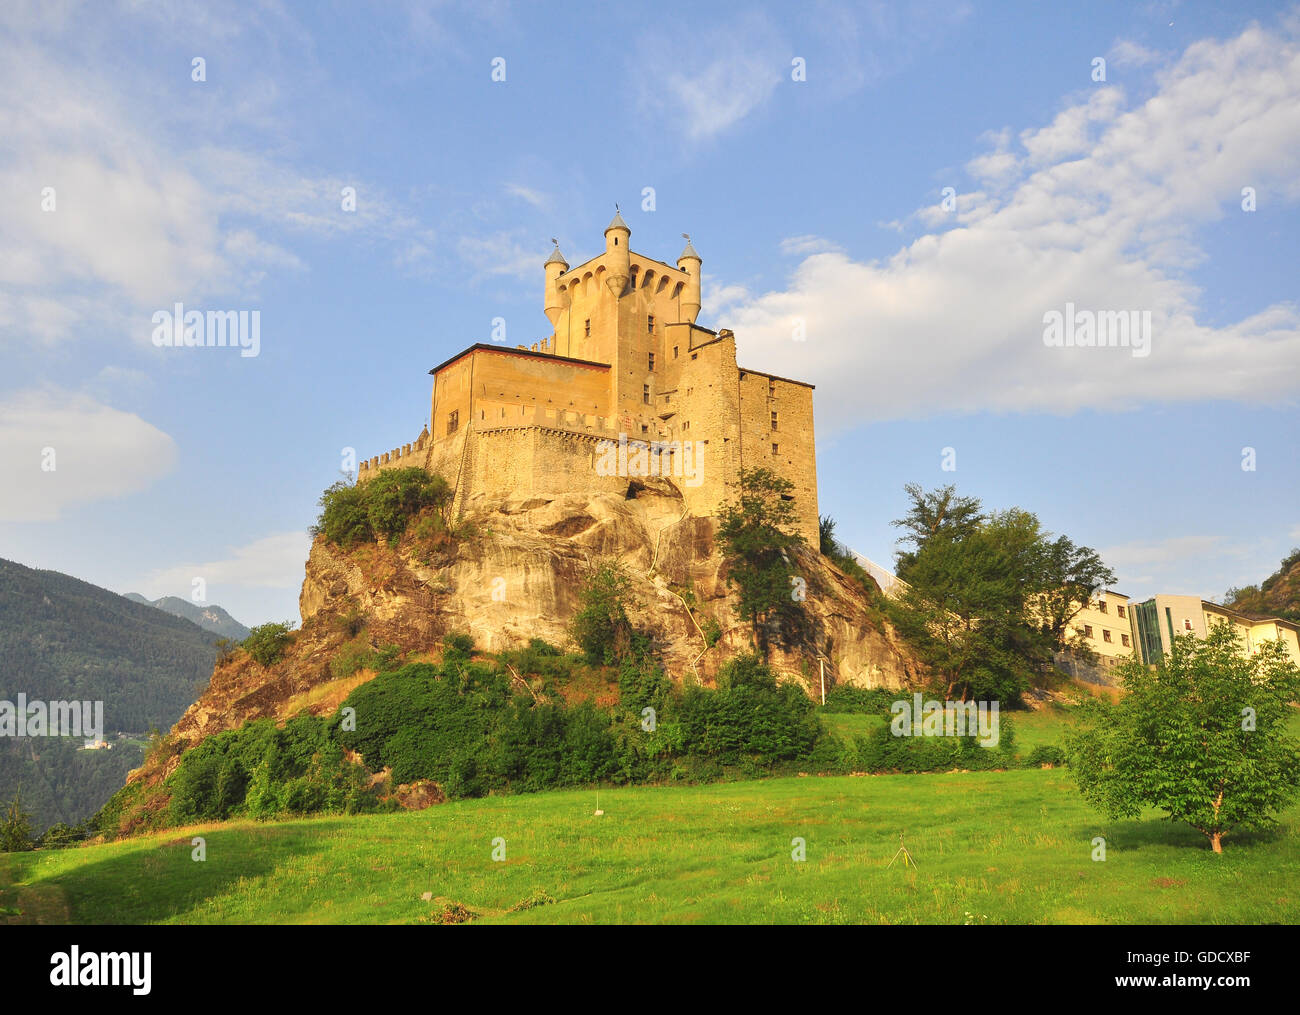 Ancient castle in Saint Pierre, Val d'Aosta, Italy Stock Photo